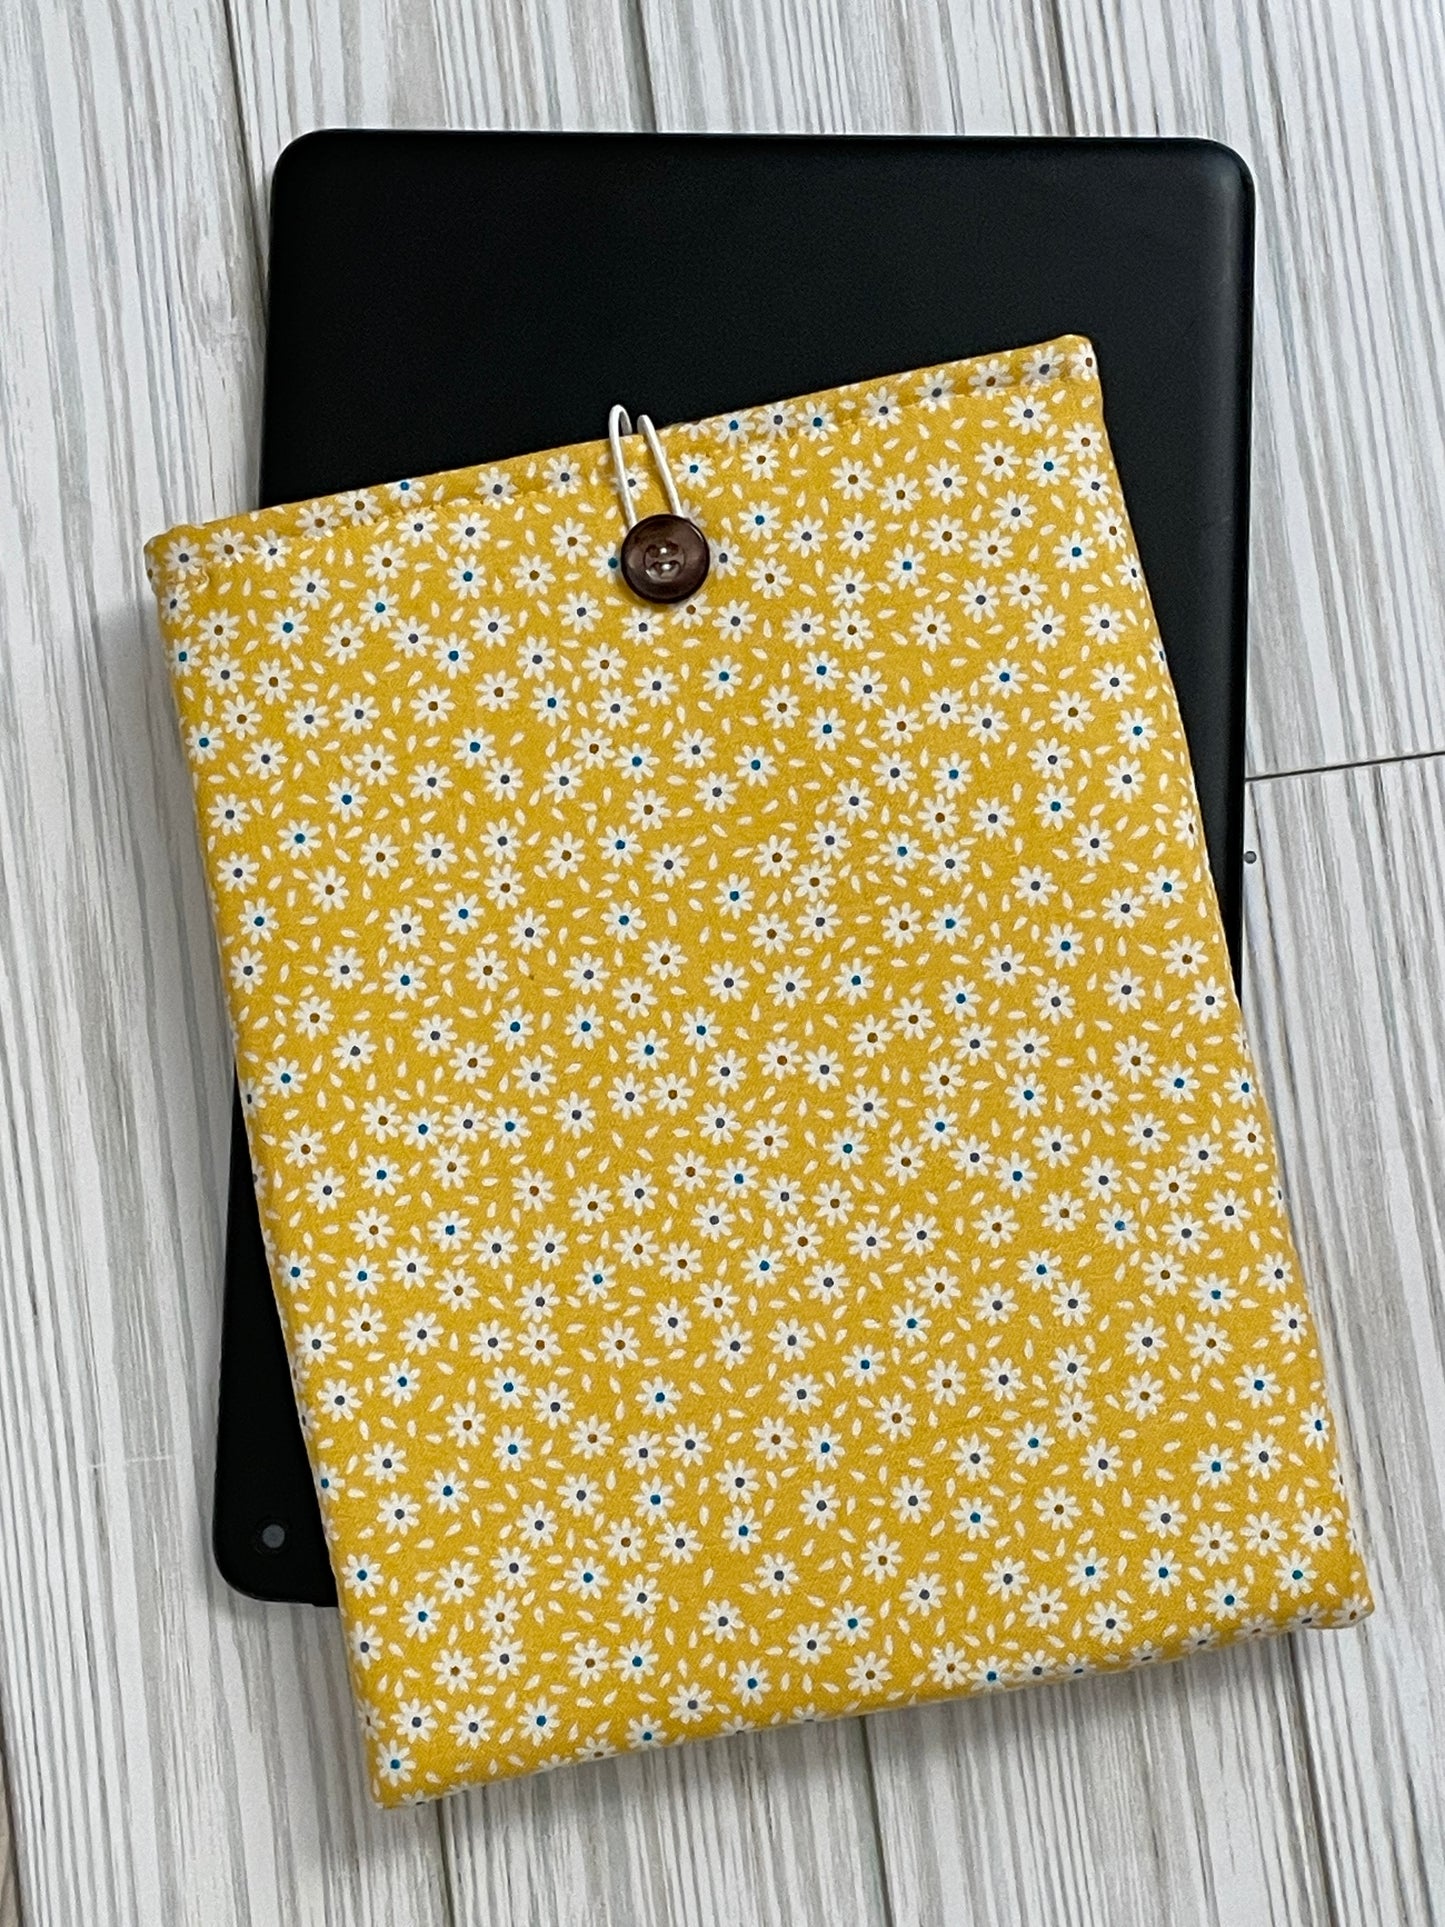 Retro Floral Pattern Kindle Paperwhite Case, Protective Book Sleeve